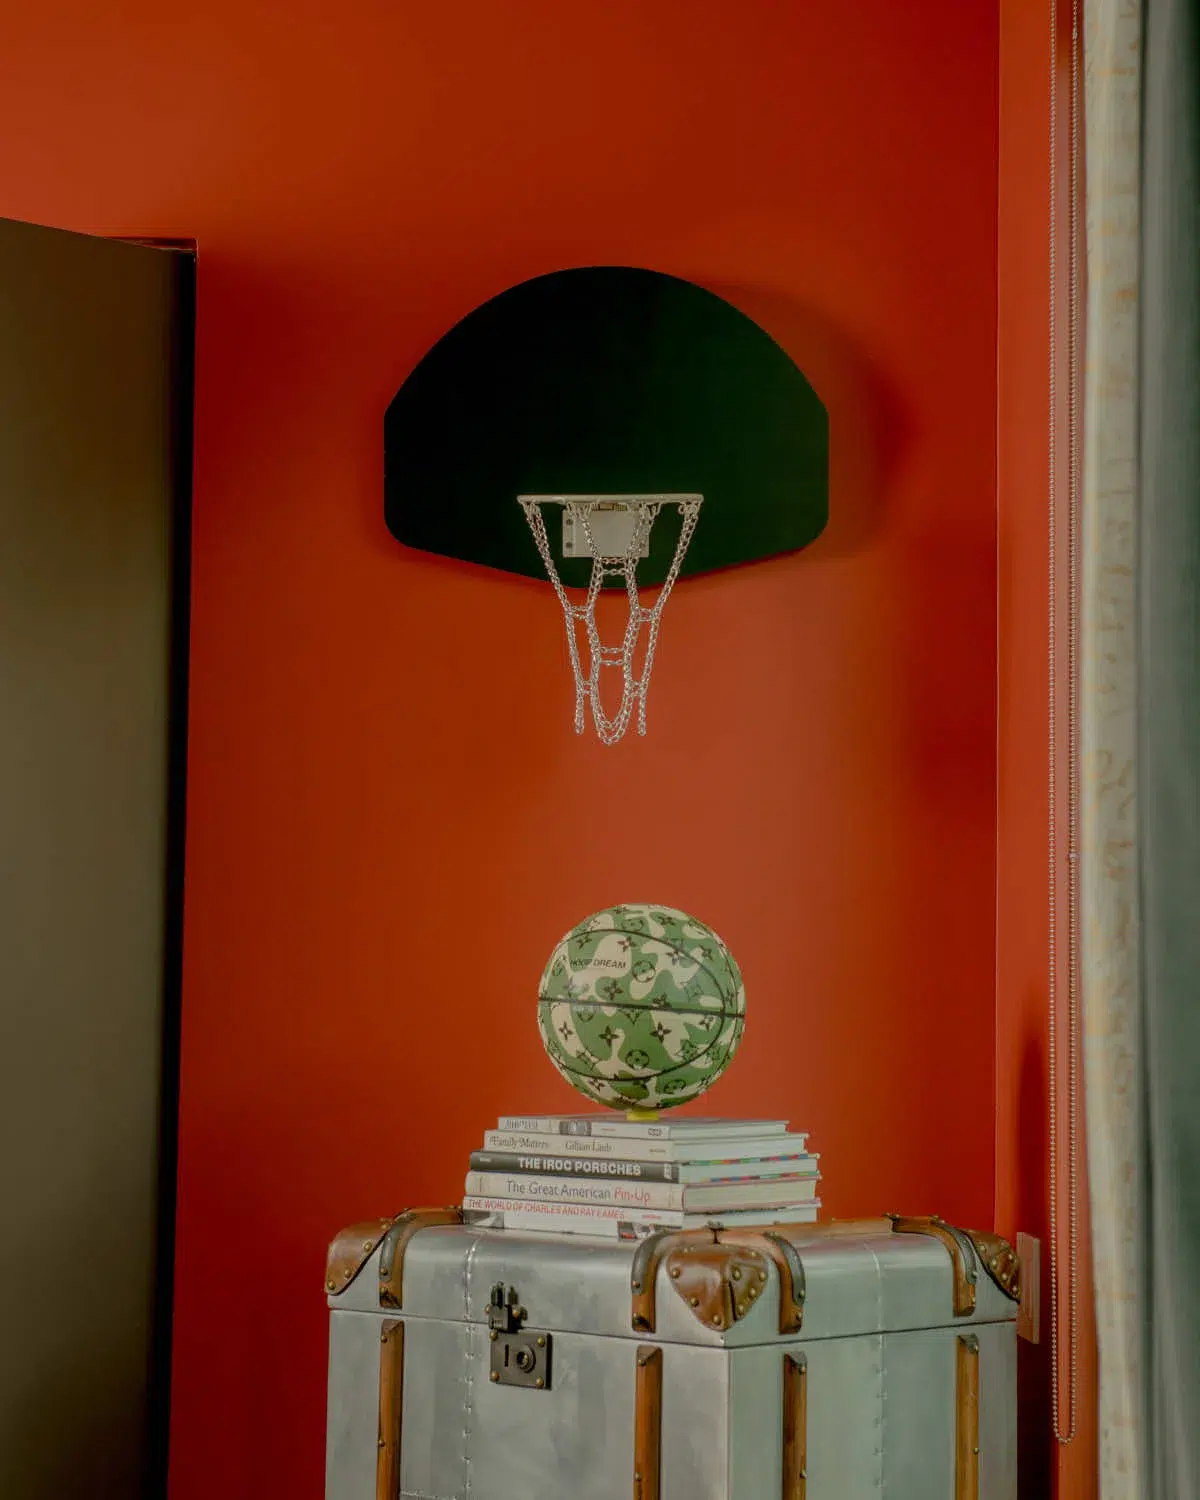 A room with a wooden hoop painted green.